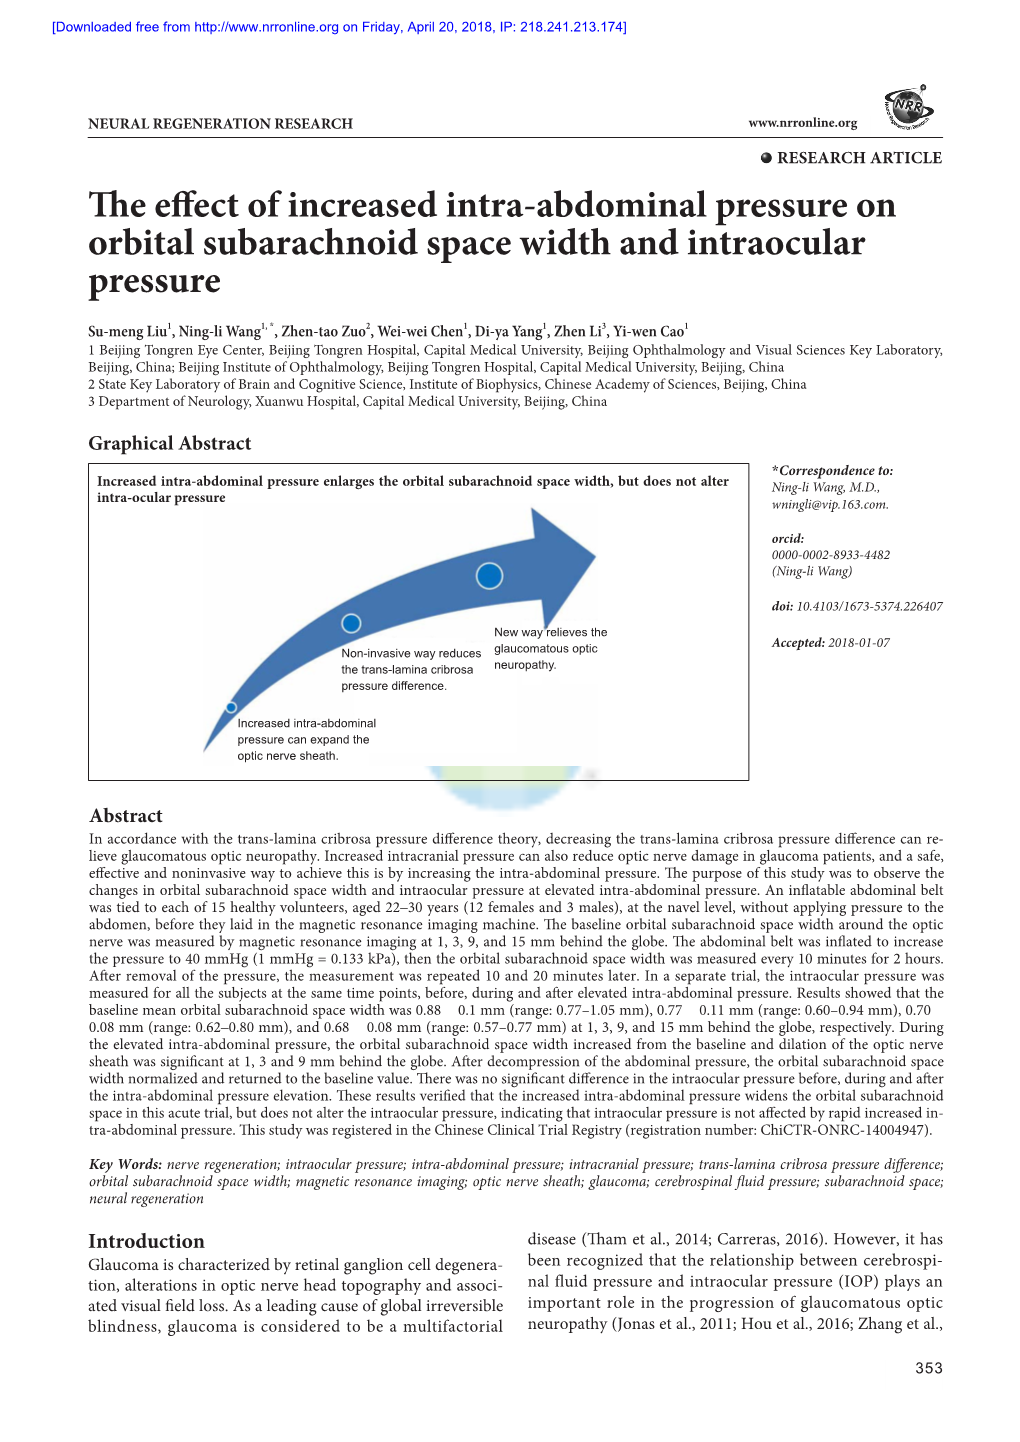 The Effect of Increased Intra-Abdominal Pressure on Orbital Subarachnoid Space Width and Intraocular Pressure